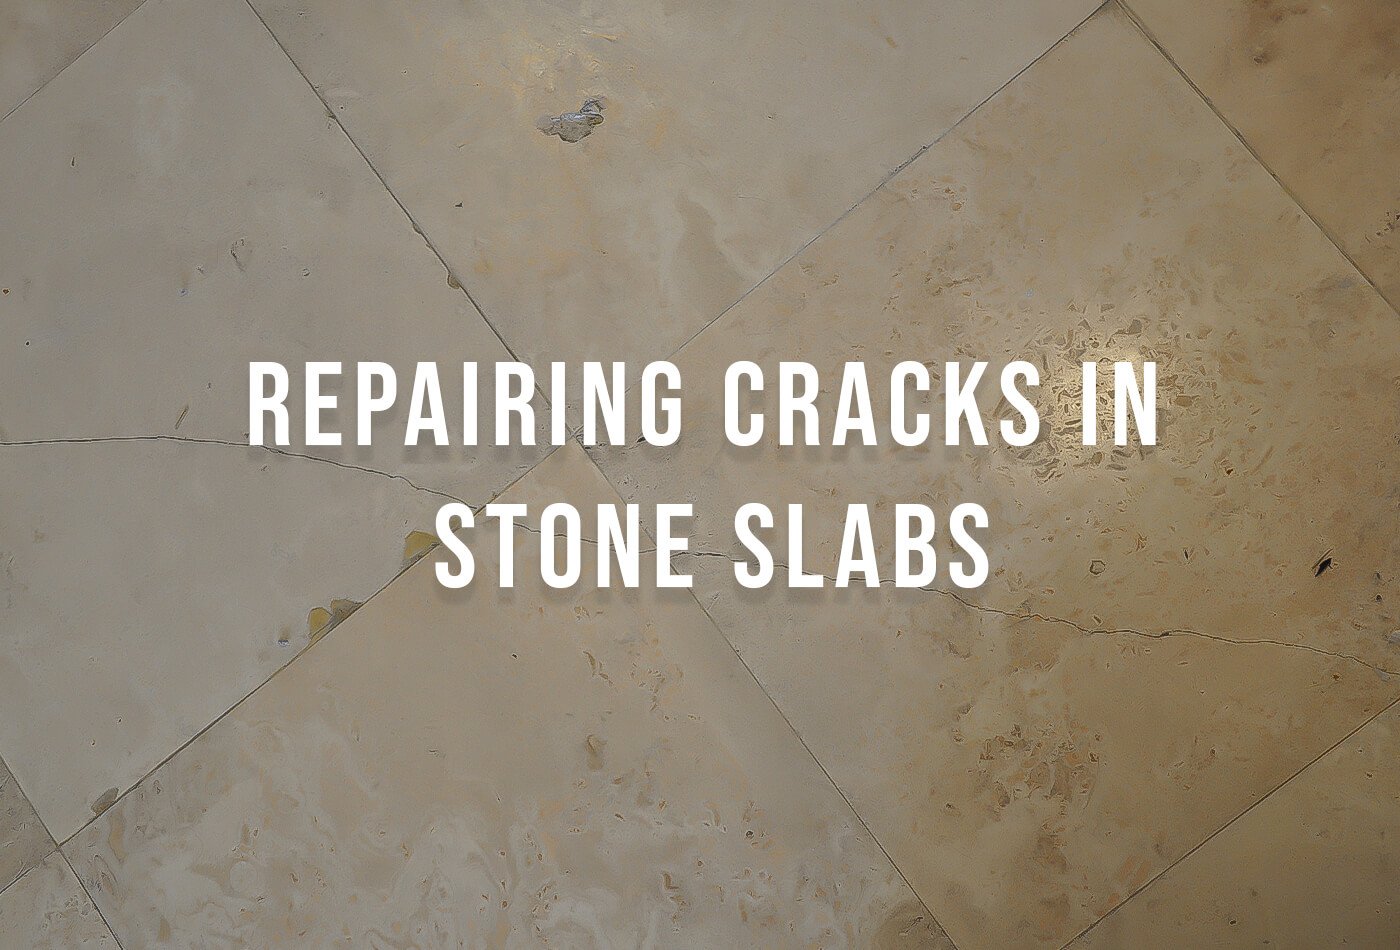 Repairing Cracks in Stone Slabs: Let's Ask the Professionals